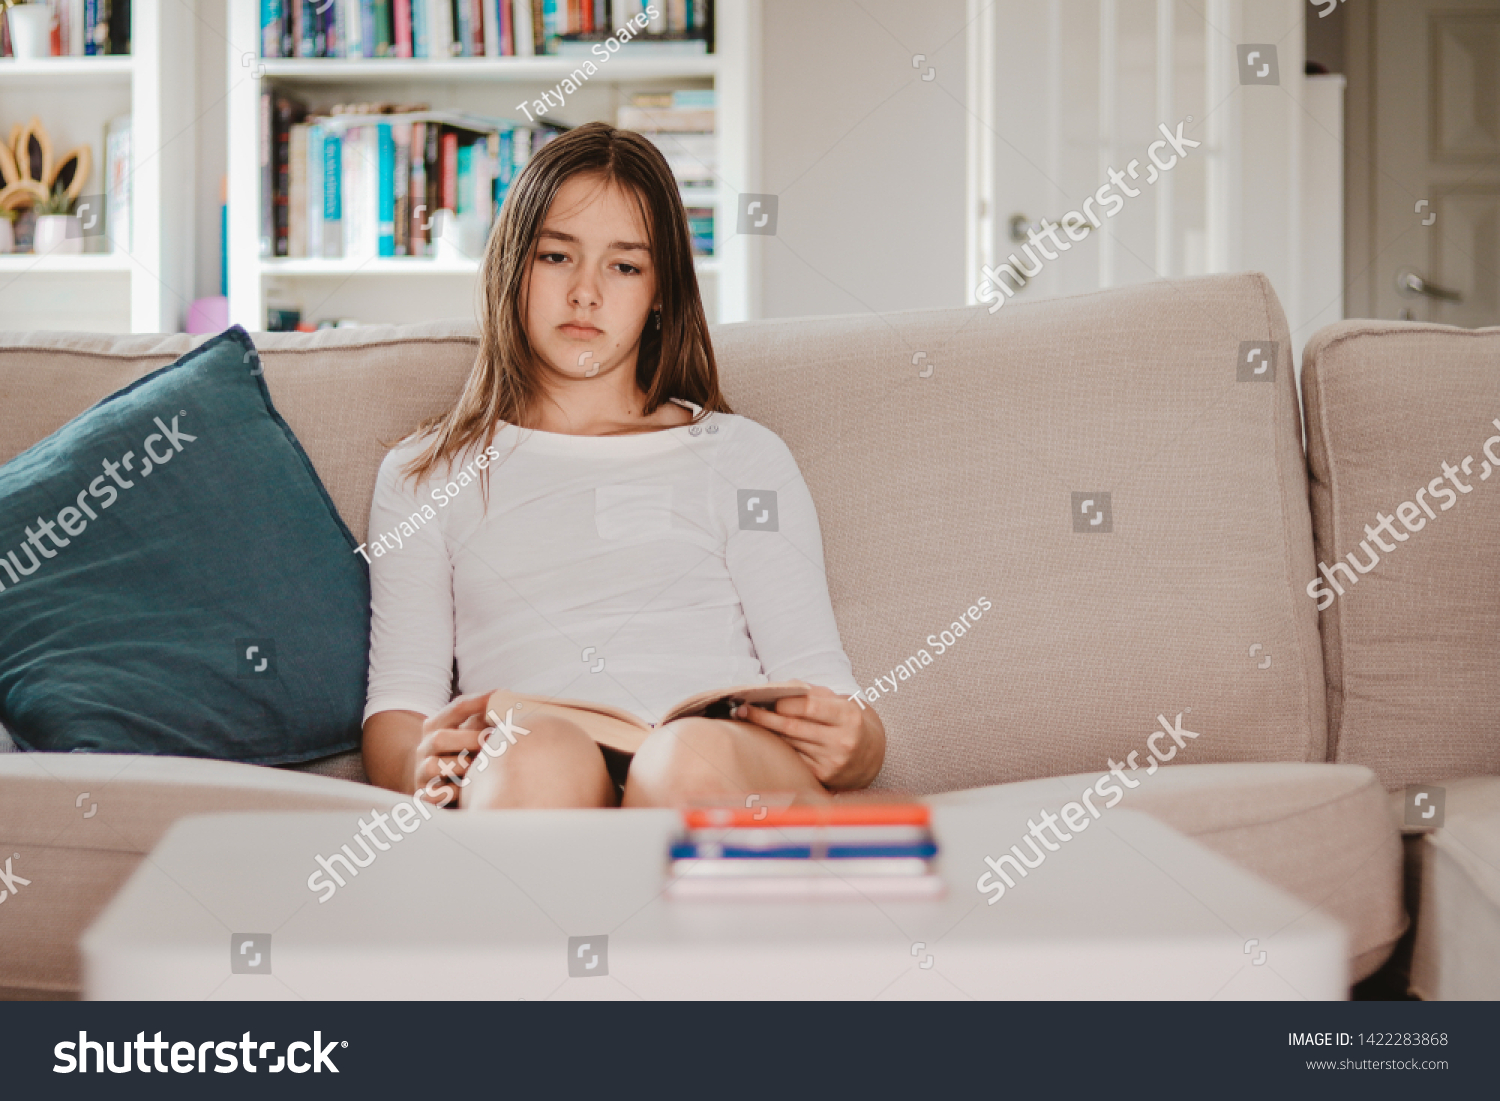 No phone punishment. Upset preteen girl with sad face expression holding book and looking at pile of smartphones at table taken from her. Social media gadget detox. Unplugged. No social network #1422283868